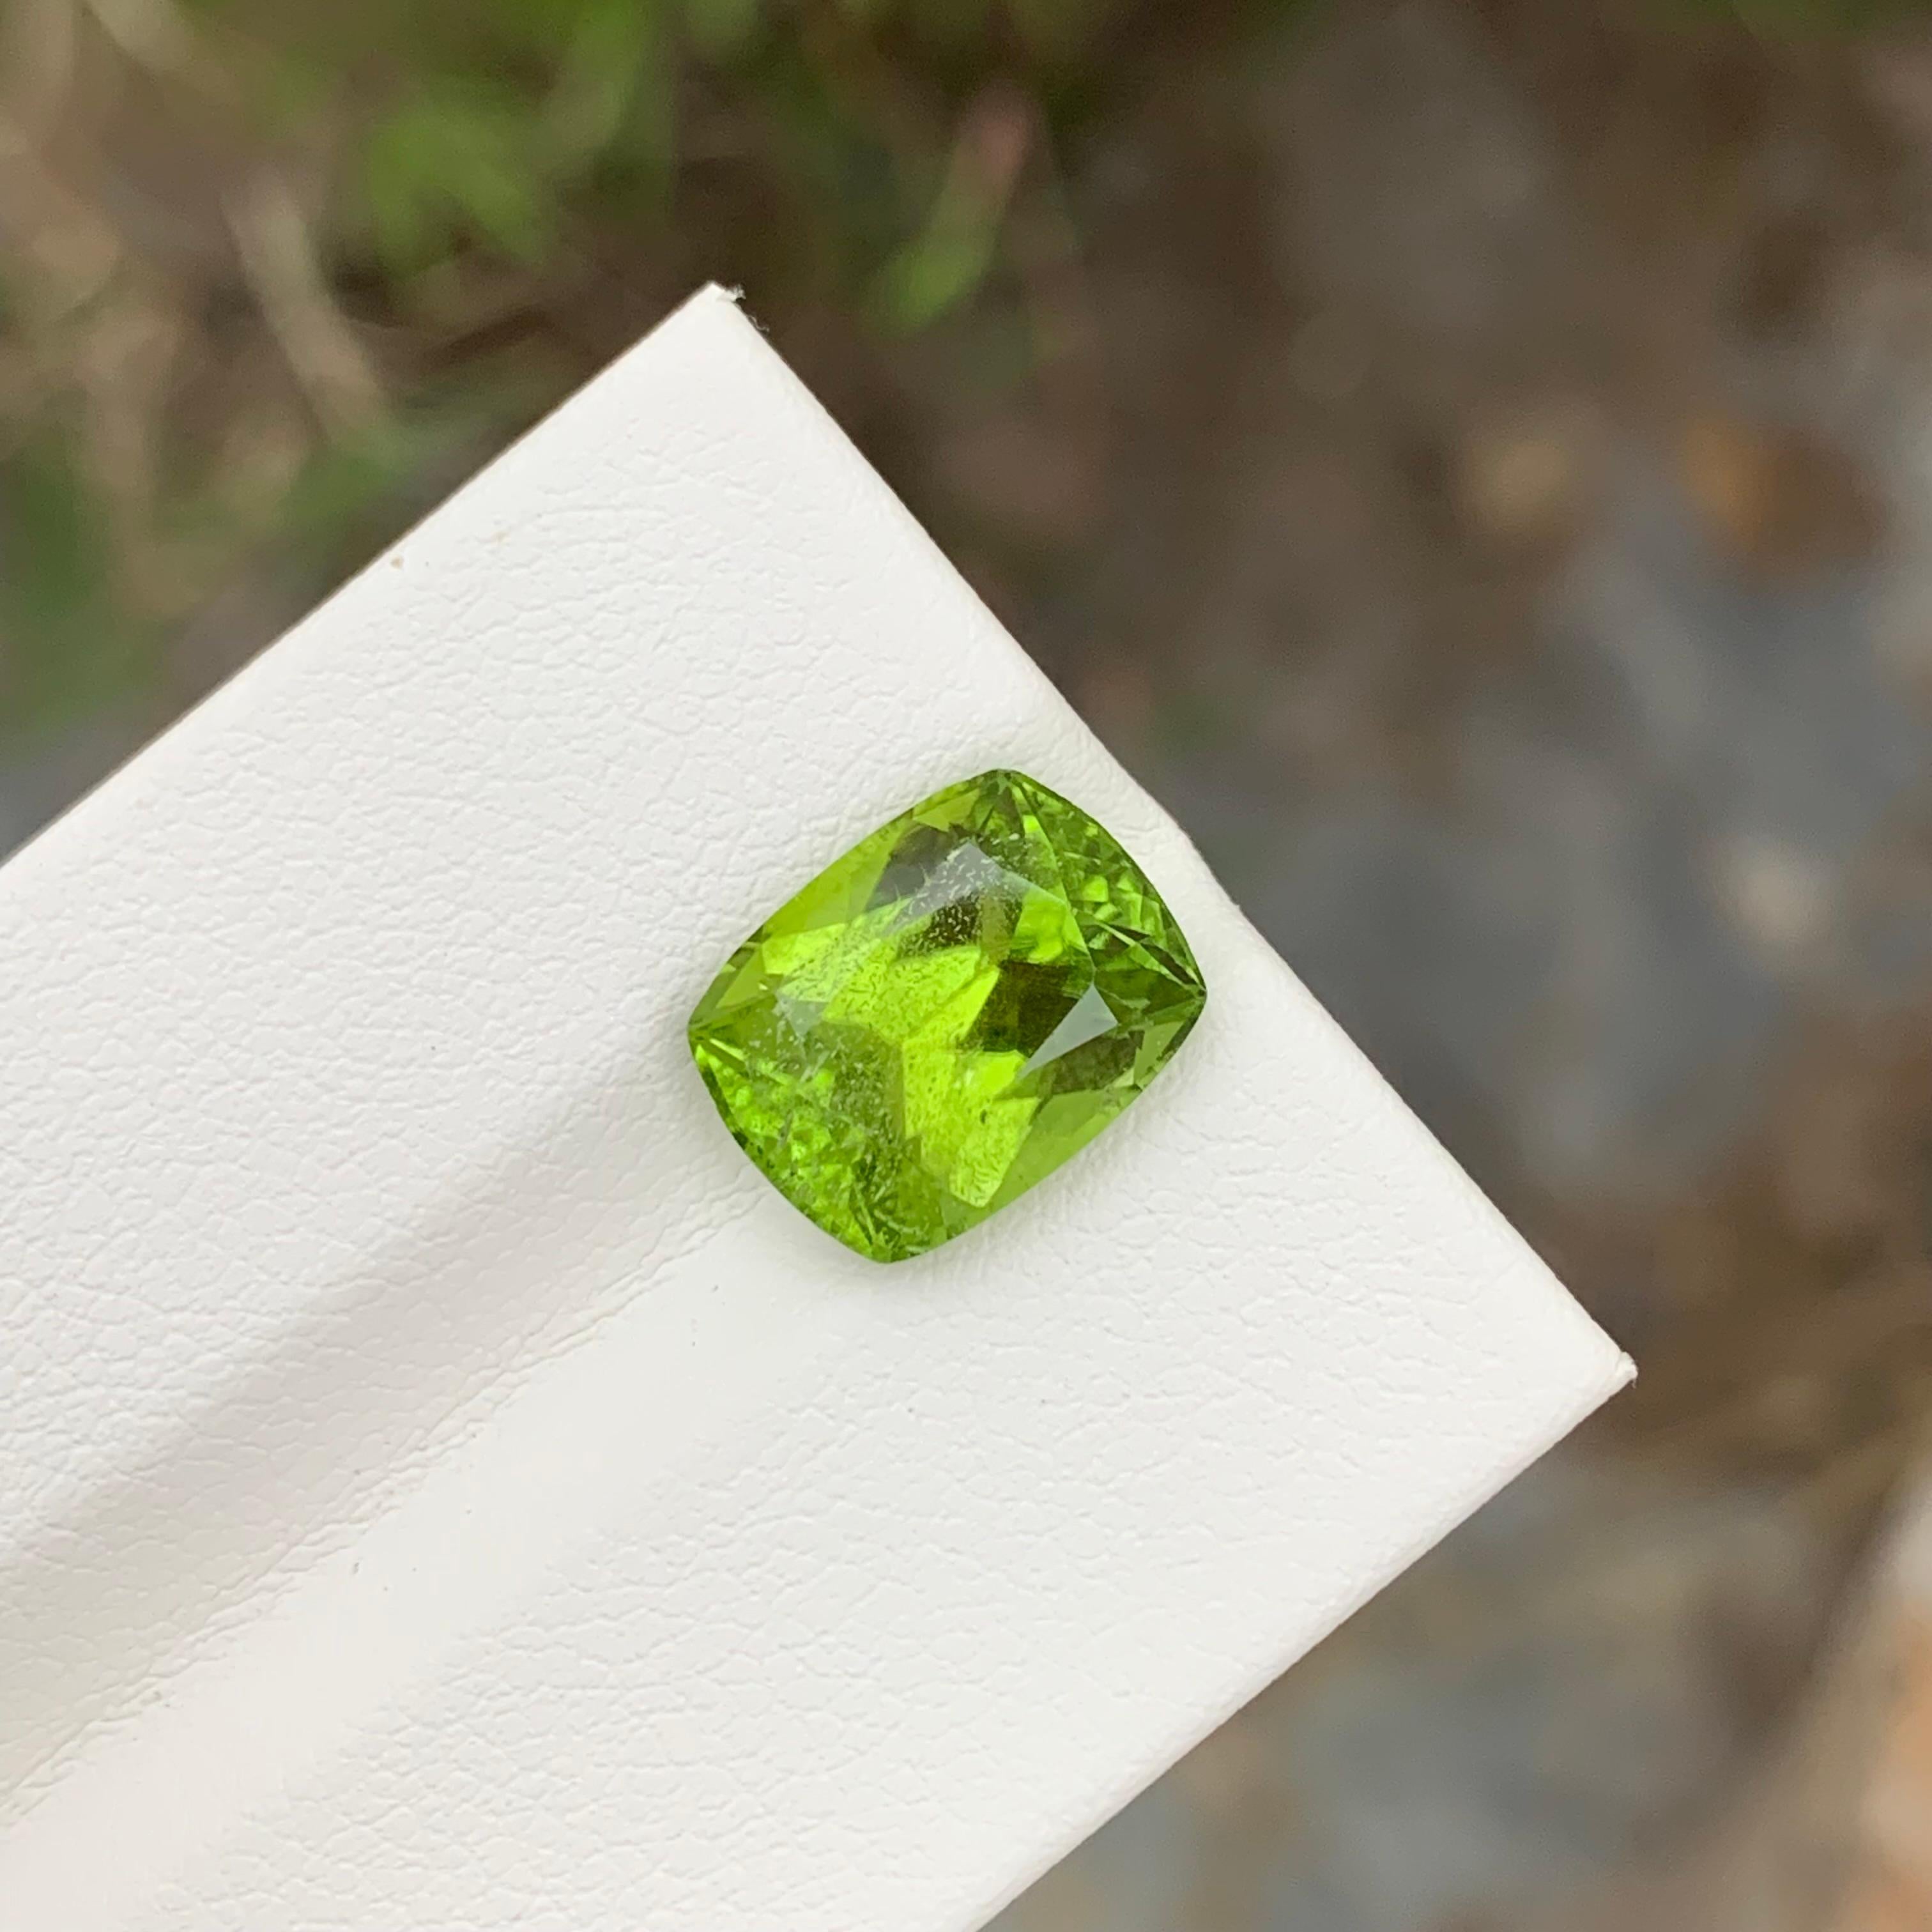 Loose Peridot
Weight: 5.10 Carats
Dimension: 11.3 x 8.8 x 6.4 Mm
Colour: Green
Origin: Supat Valley, Pakistan
Shape: Emerald 
Certificate: On Demand
Treatment: Non

Peridot, a vibrant and lustrous gemstone, has been cherished for centuries for its